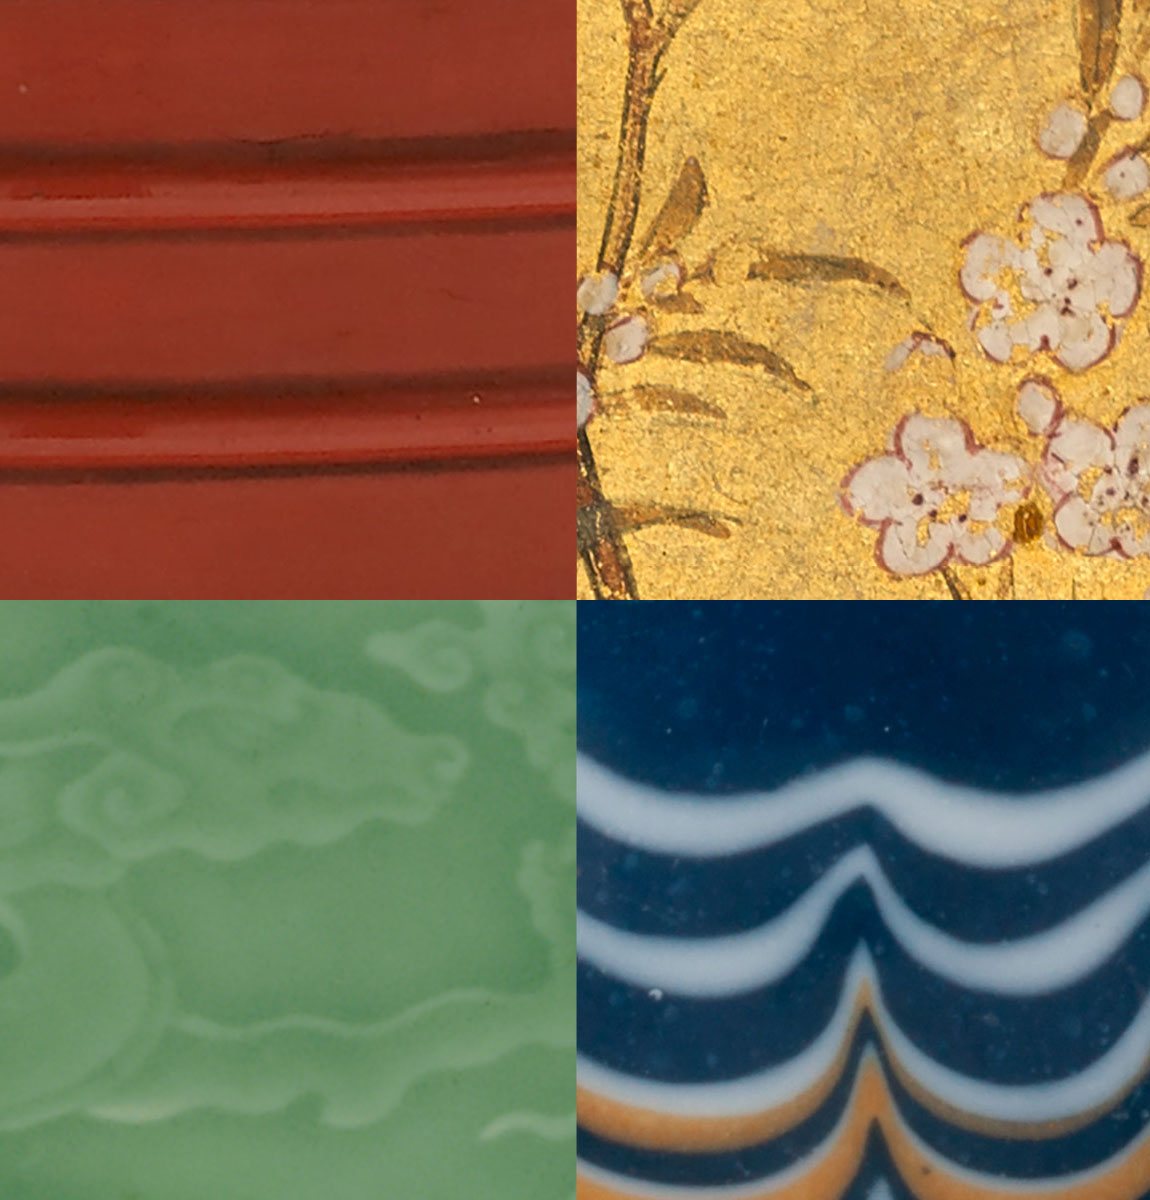 details of 4 colorful objects